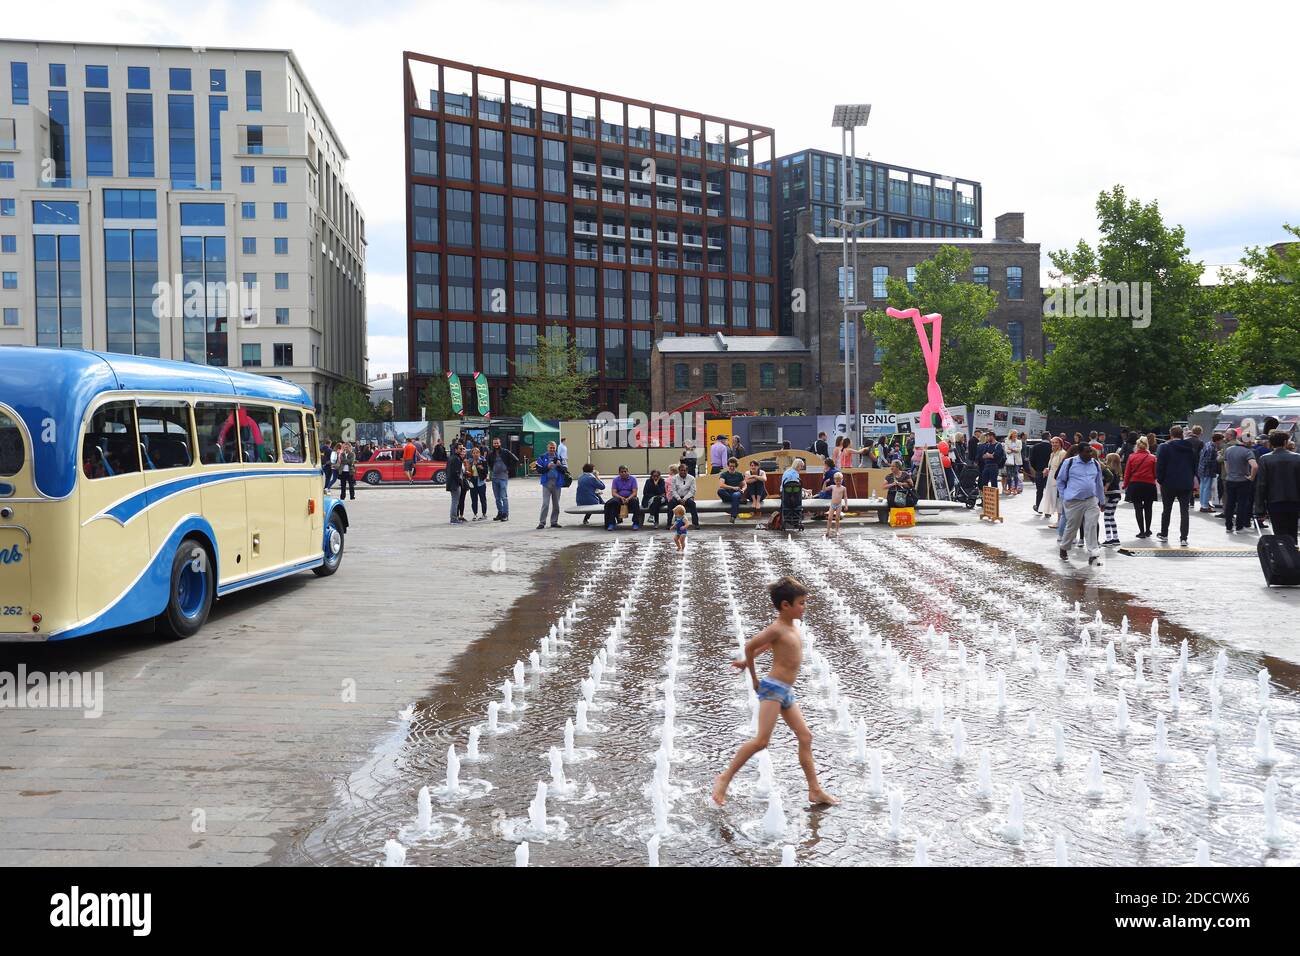 Great Britain / England /London / Granary Square fountains at King's Cross London. Kids in sprinklers at Granary Square Water Feature in Kings Cross. Stock Photo